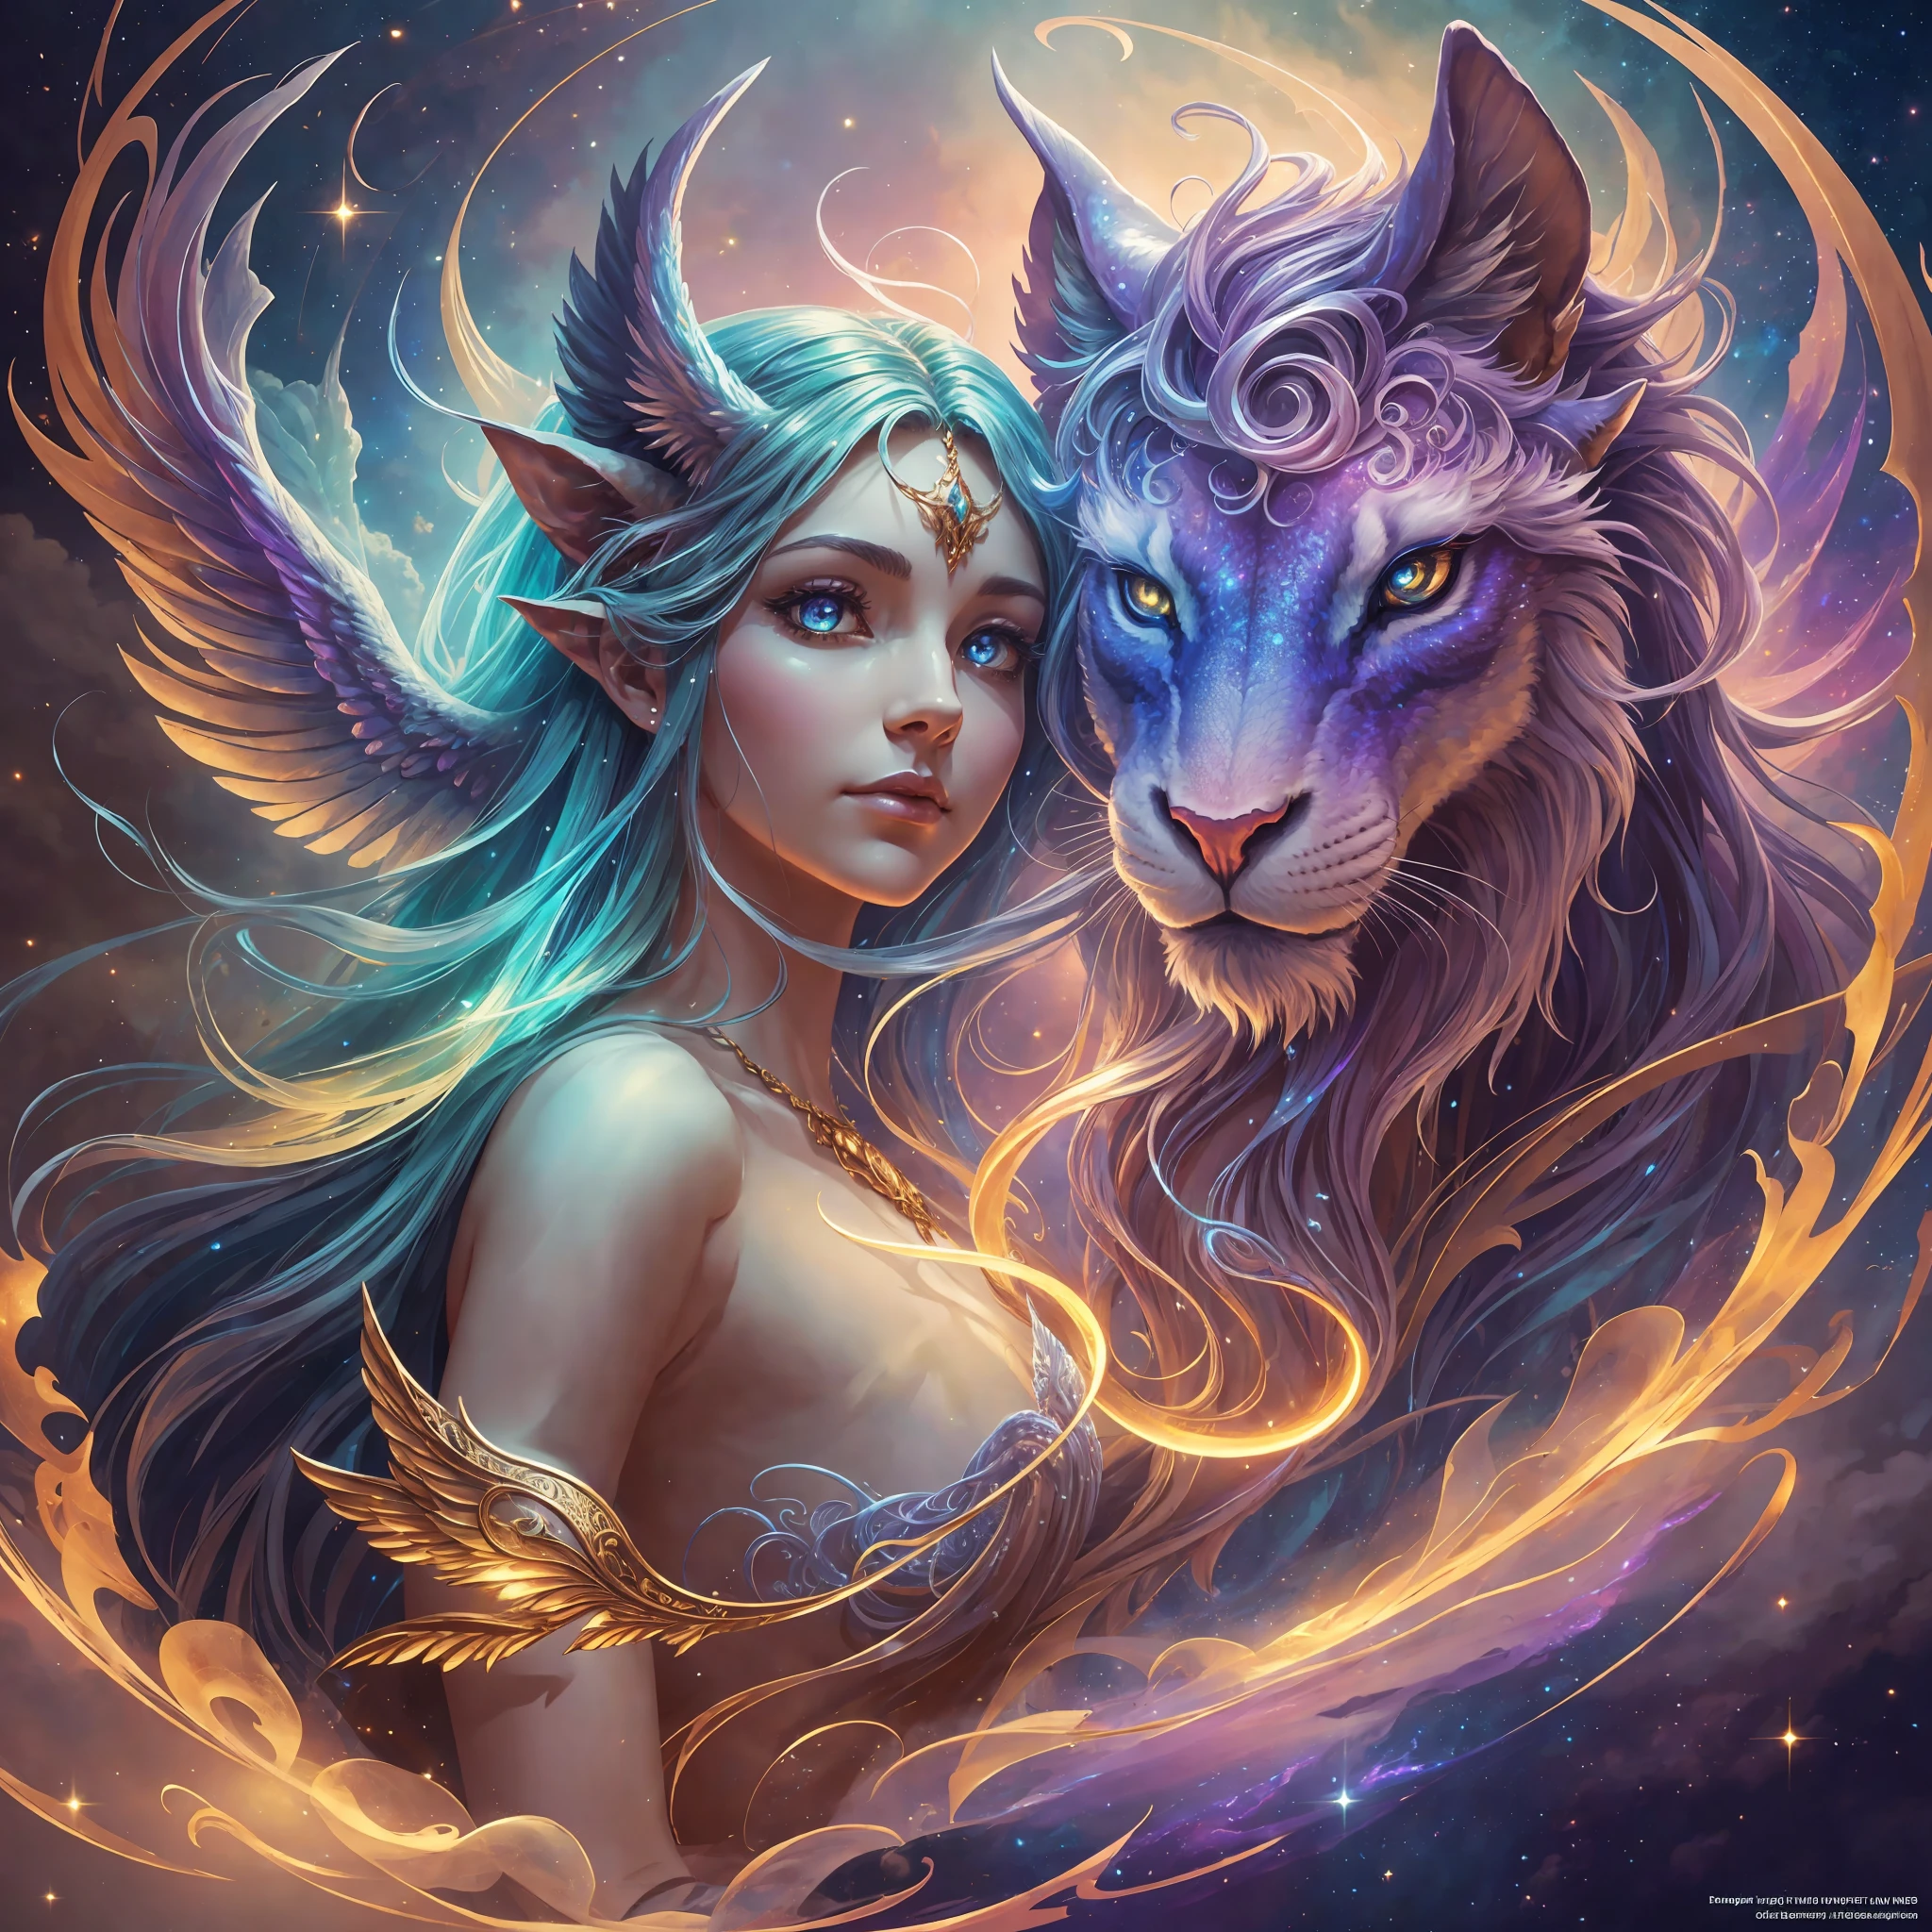 ((masterpiece)), (ultra-detailed), (intricate details), (high resolution CGI artwork 8k), Create artwork of an interesting celestial being with a stunning chimera winding around her. The chimera should be colorful and beautiful and highly detailed. The figure should be delicate and mysterious with hair dissolving into bright stars. Pay close attention to detailed faces with small details such as mesmerizing eyes with realistic shading. The artwork's color palette should be based on fairytale fantasy, mythic fantasy, and high fantasy with saturated colors. The image should feature a dreamlike, ethereal atmosphere with shimmering details and gossamer details. The background should be interesting but subtle, with the focus remaining on the figures in the foreground. Camera: Prioritize compelling and dynamic composition. Lighting: Utilize atmospheric and volumetric lighting and dynamic lighting to emphasize the image's awe-inspiring aura. Choose an angle that highlights the character's beauty and enhances the magical majesty of the artwork. Consider popular trends in fantasy images such as those from ArtStation and Midjourney. Resolution: Aim for a high-resolution artwork to showcase intricate details and clarity.